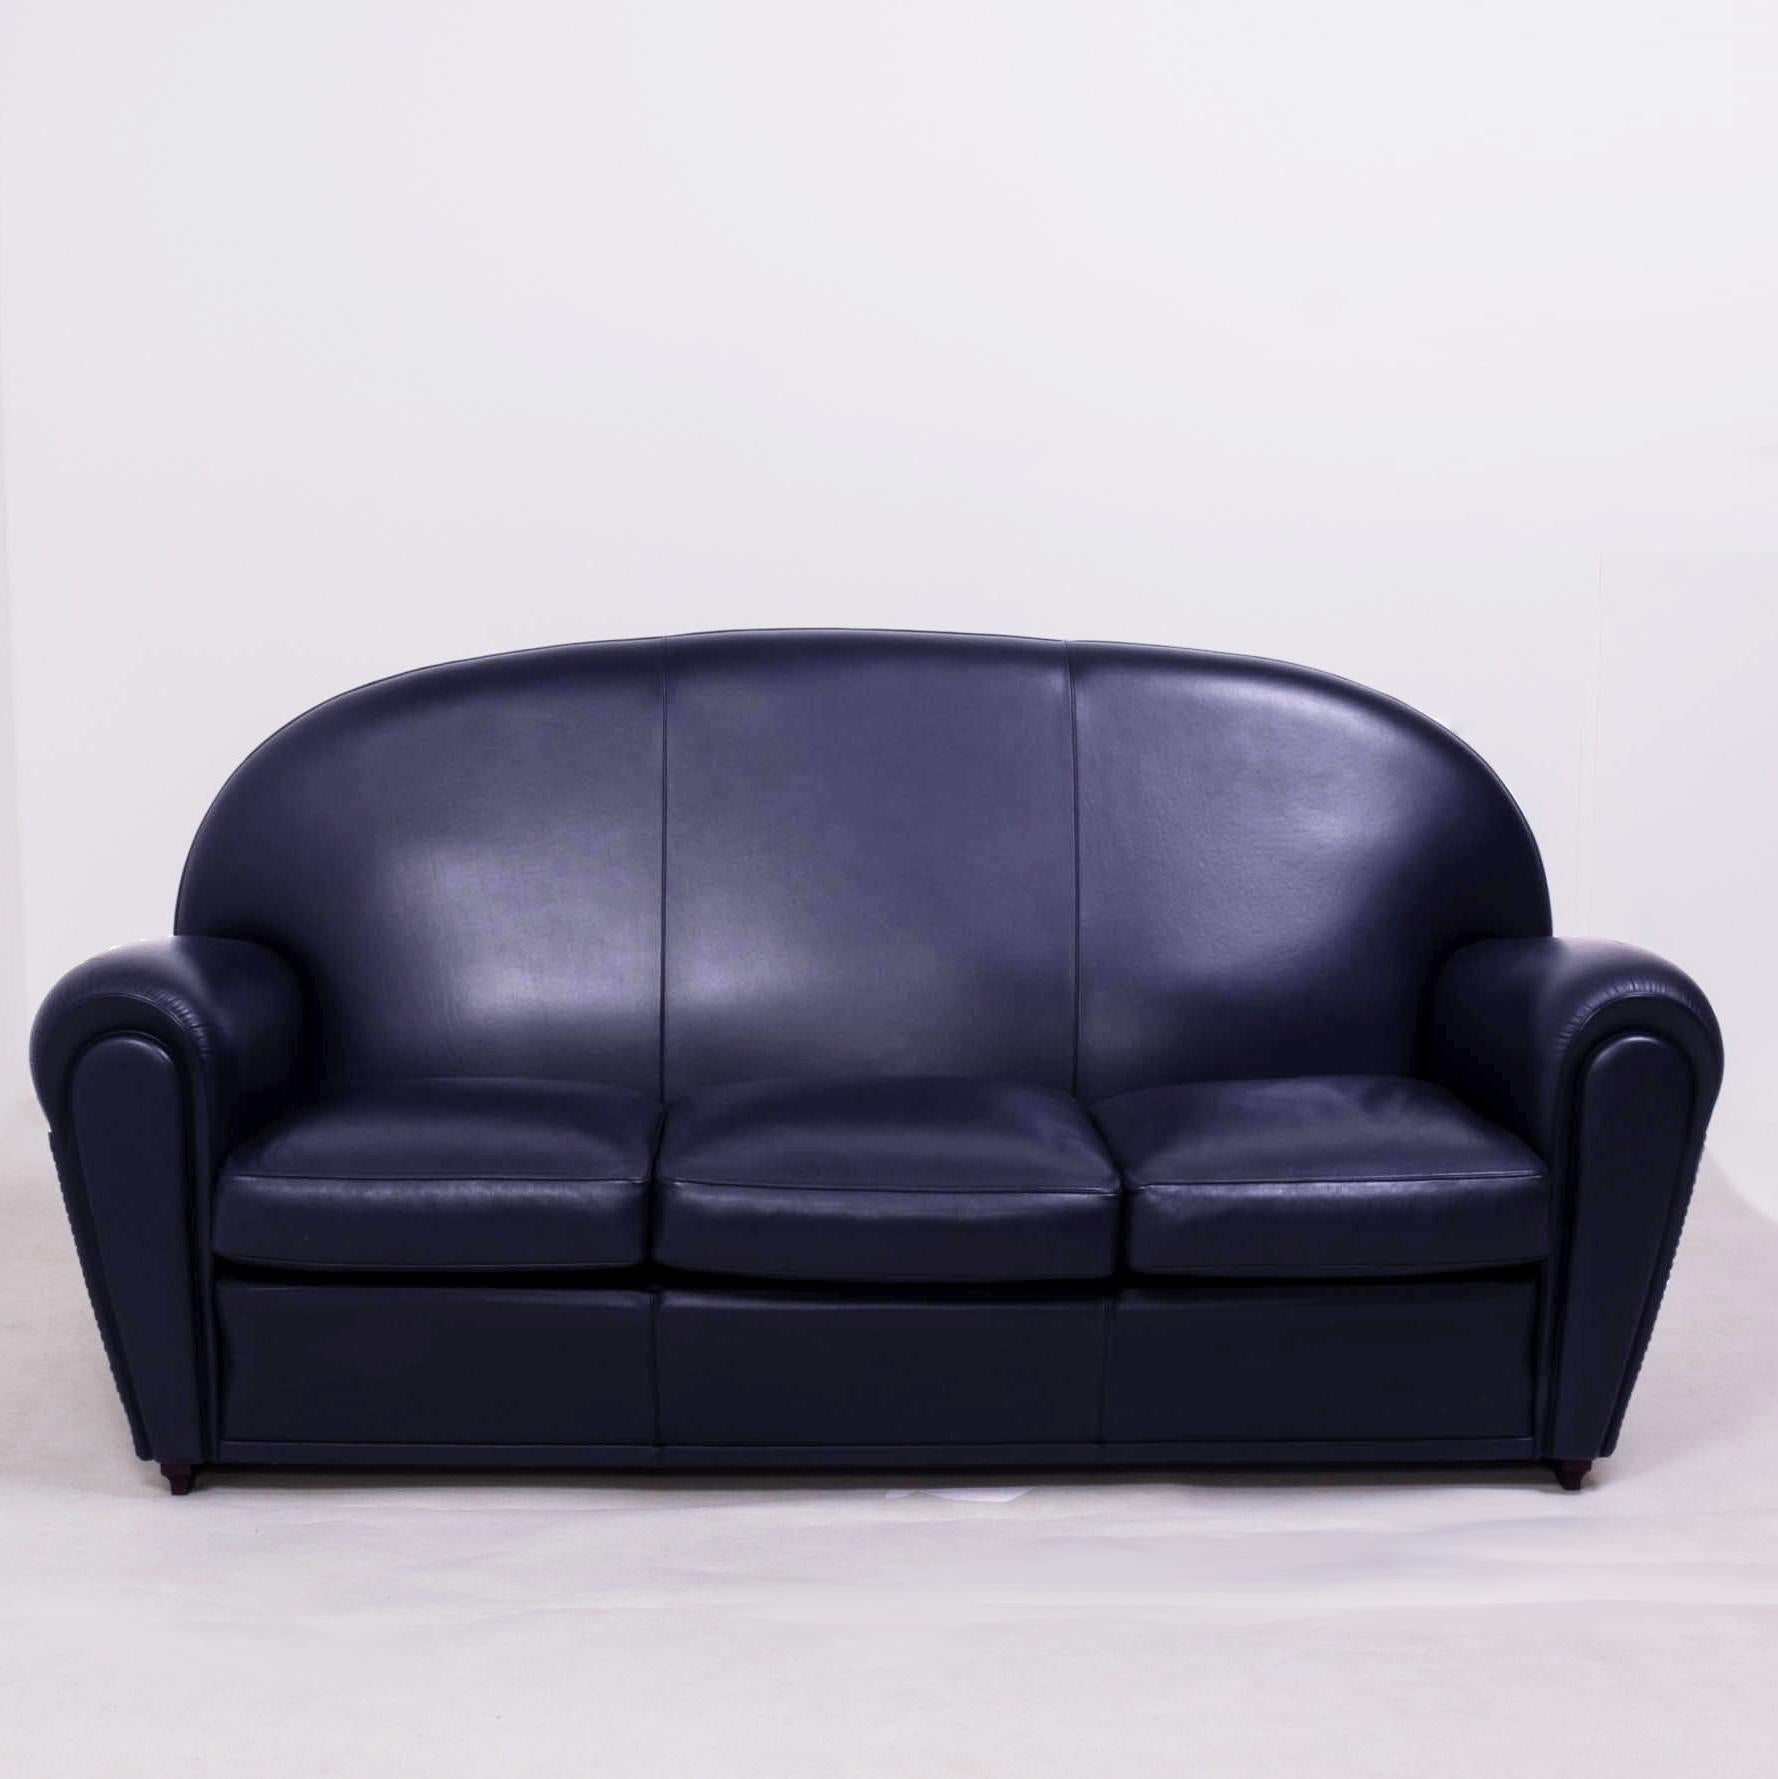 First produced in the 1930s, the vanity fair model by Poltrona Frau combines Art Deco style with modern day comfort.

Manufactured in Italy, the vanity fair is constructed from solid beech and is fully upholstered in a soft dark blue leather and